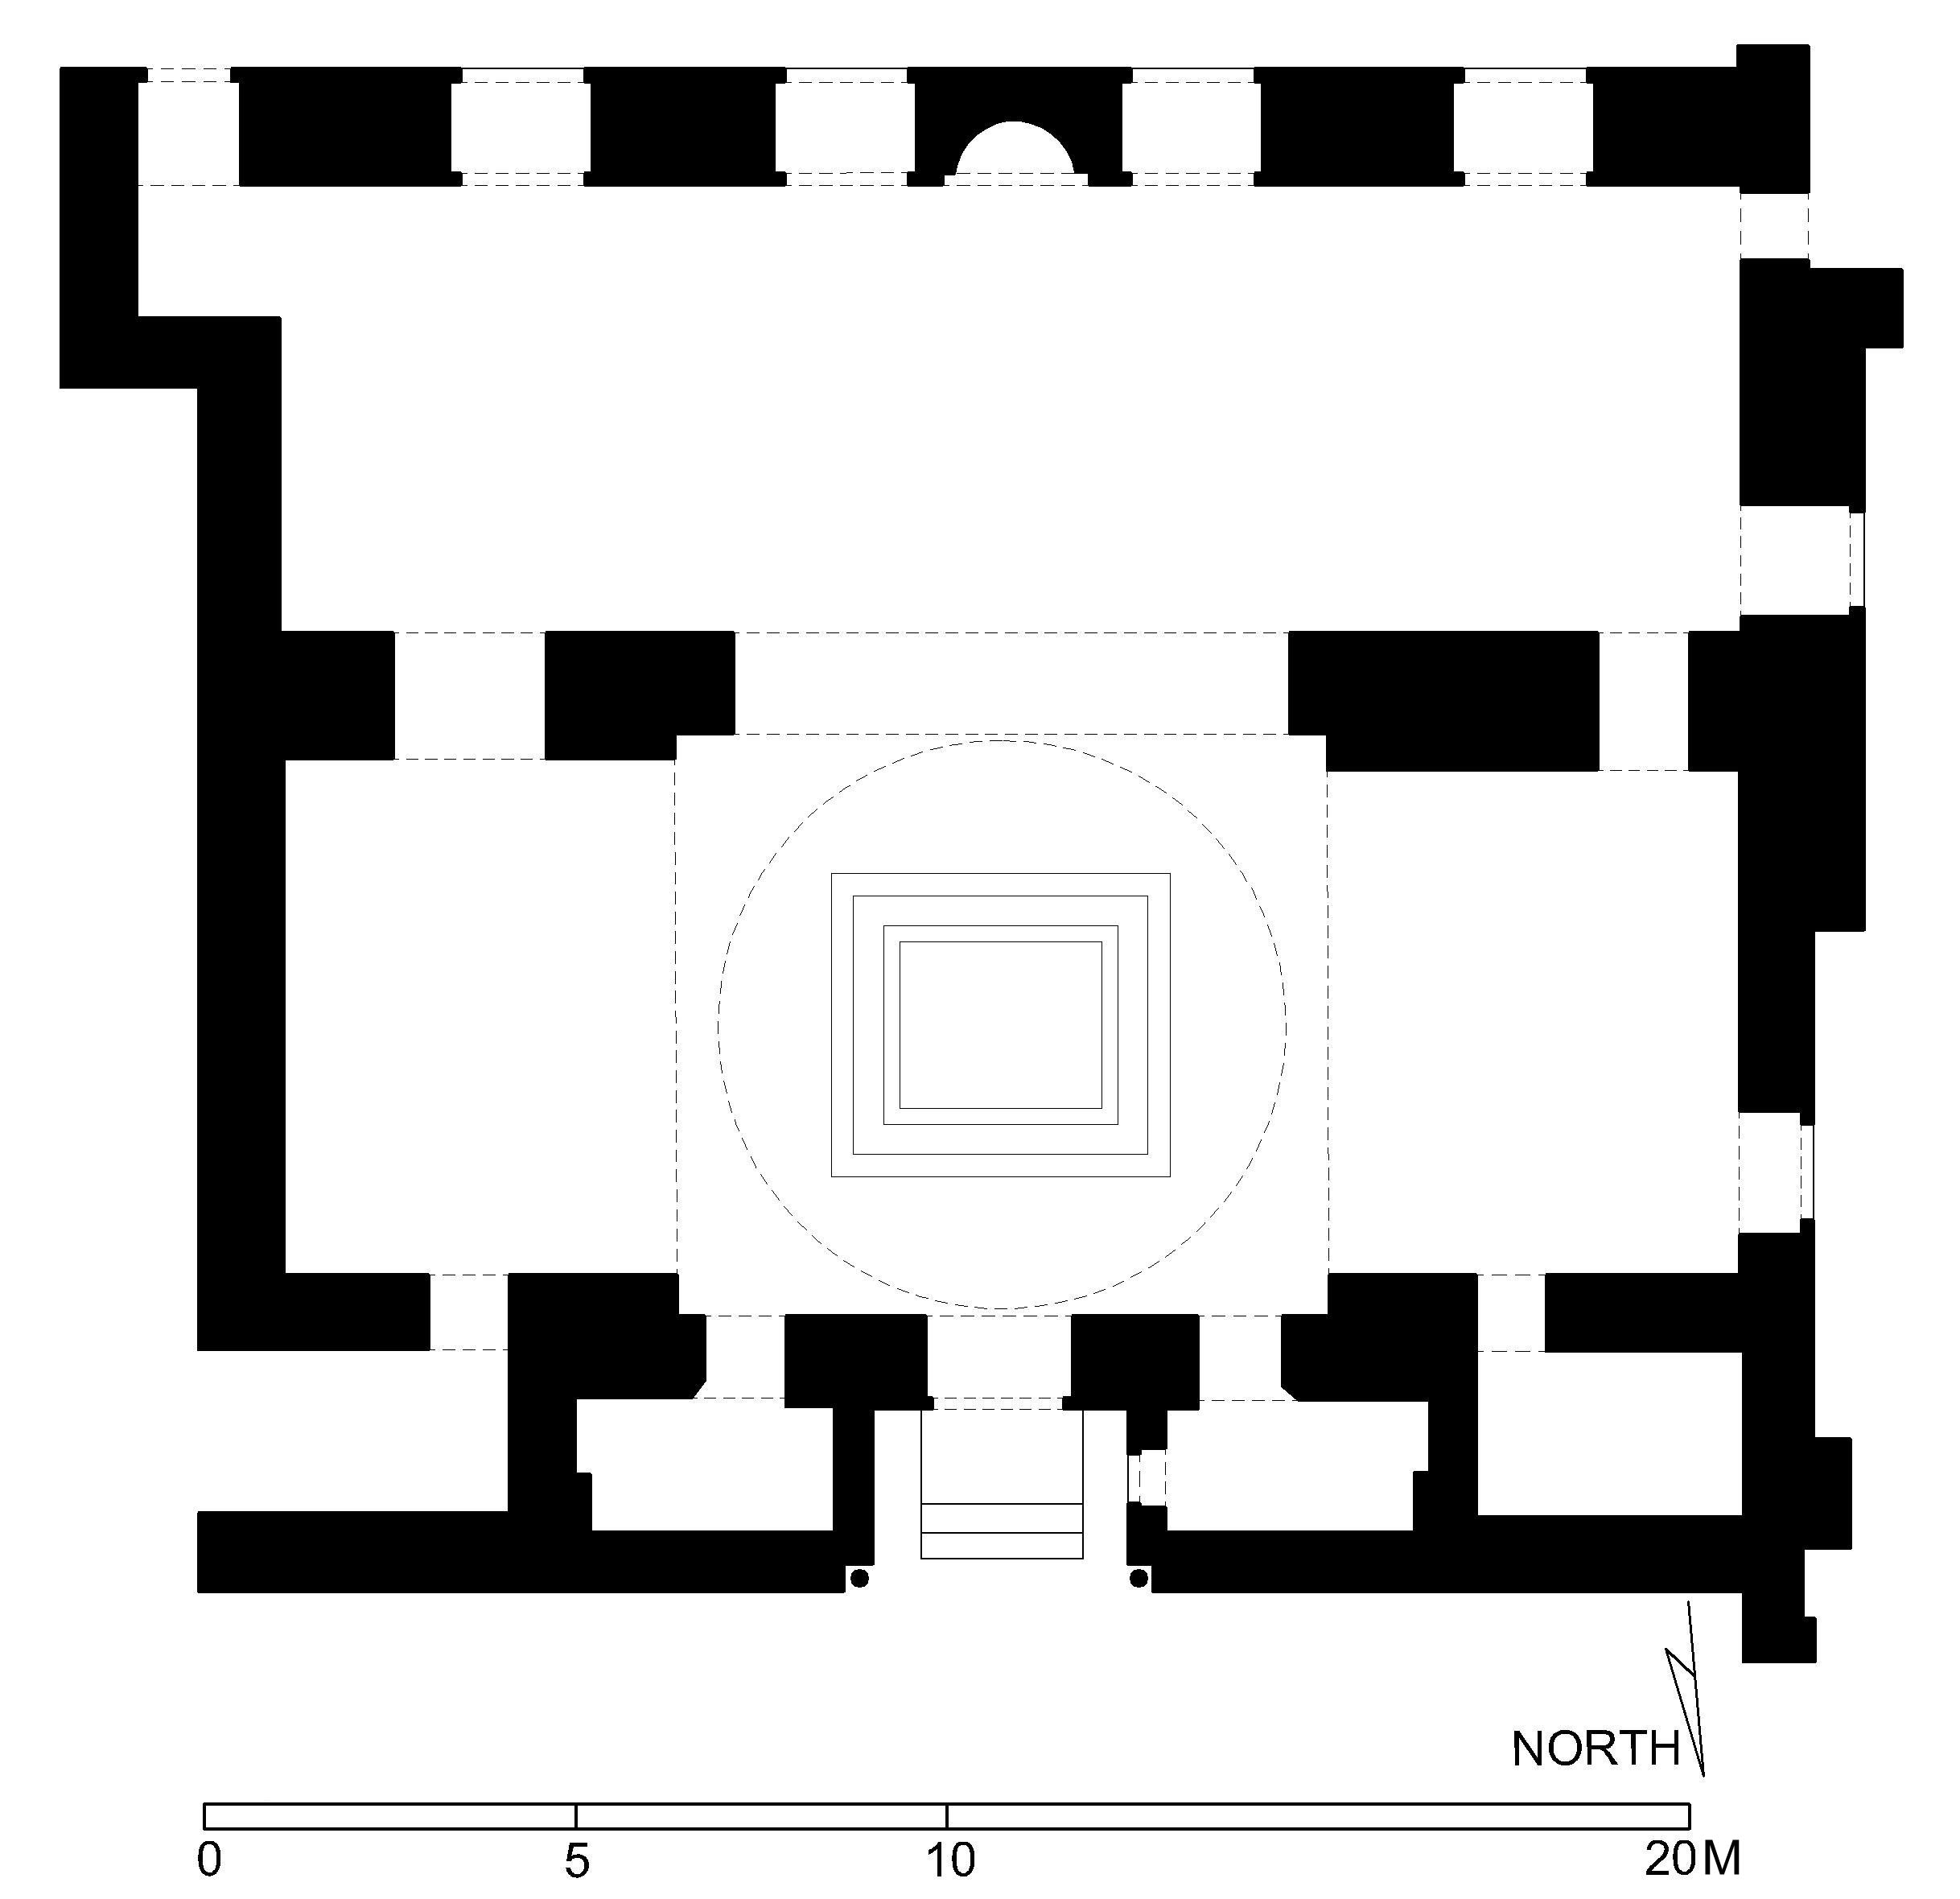 Madrasa al-Qartawiyya - Floor plan of madrasa (after Meinecke) in AutoCAD 2000 format. Click the download button to download a zipped file containing the .dwg file.